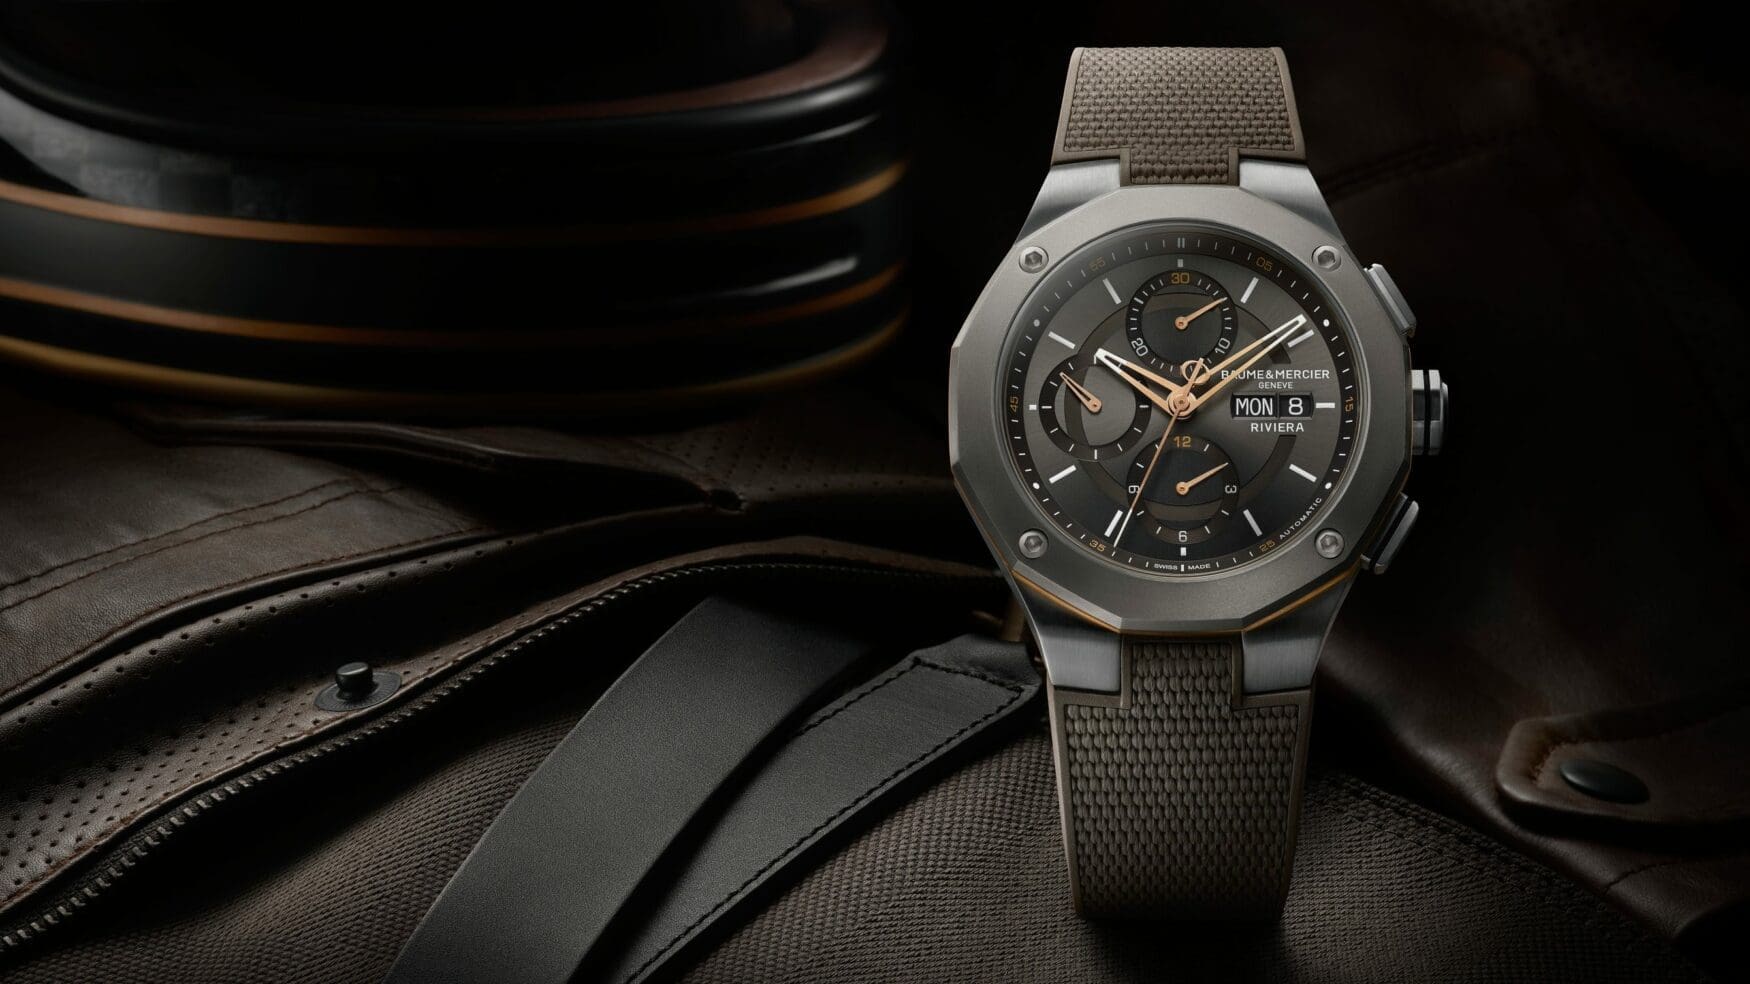 Baume & Mercier updates the Riviera Chronograph with warm, two-tone hues